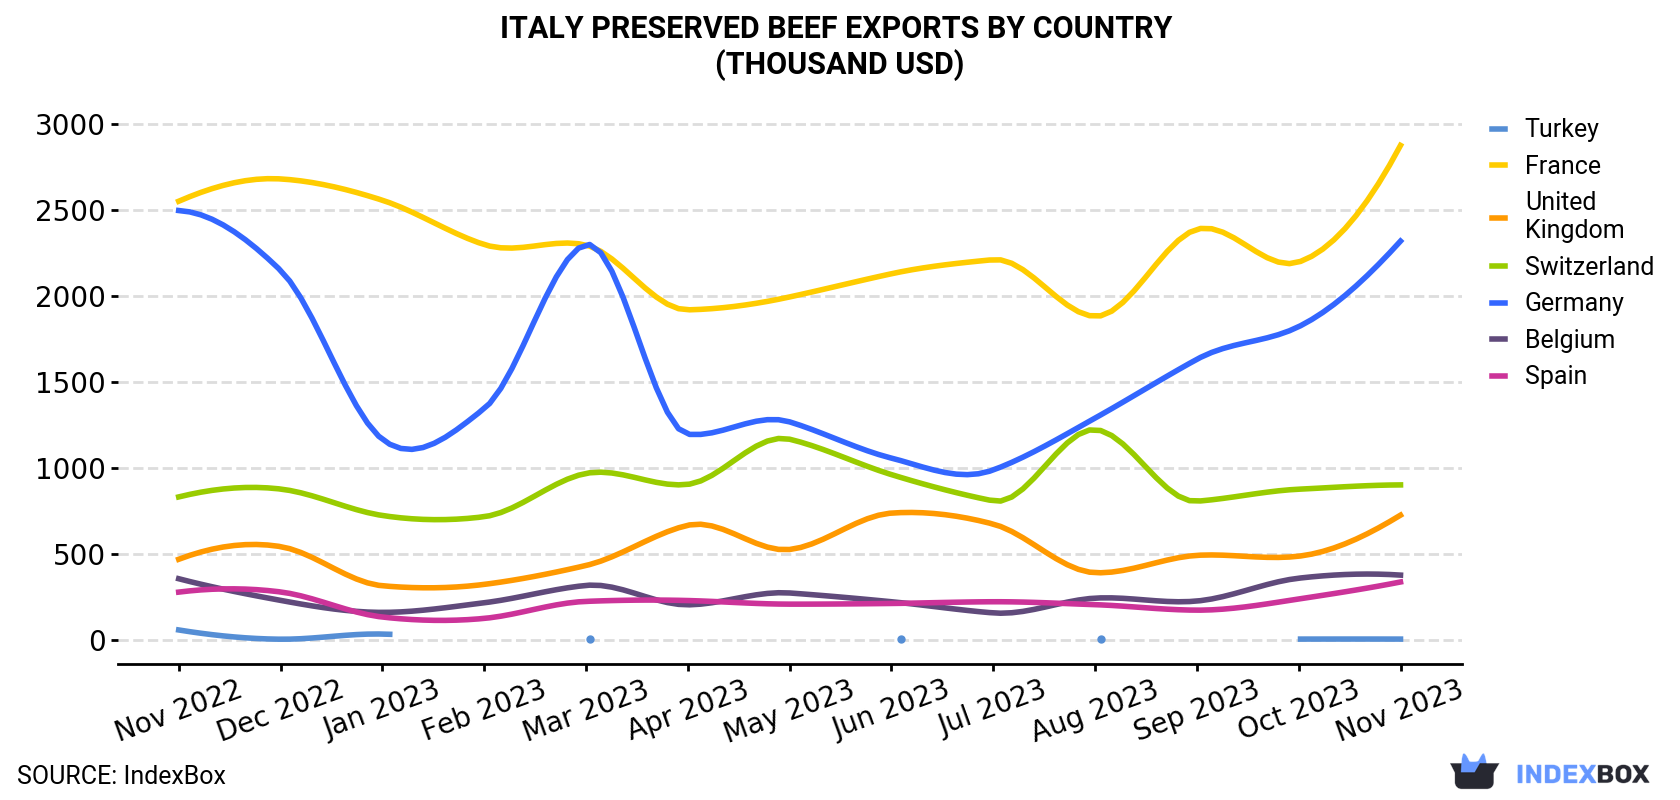 Italy Preserved Beef Exports By Country (Thousand USD)